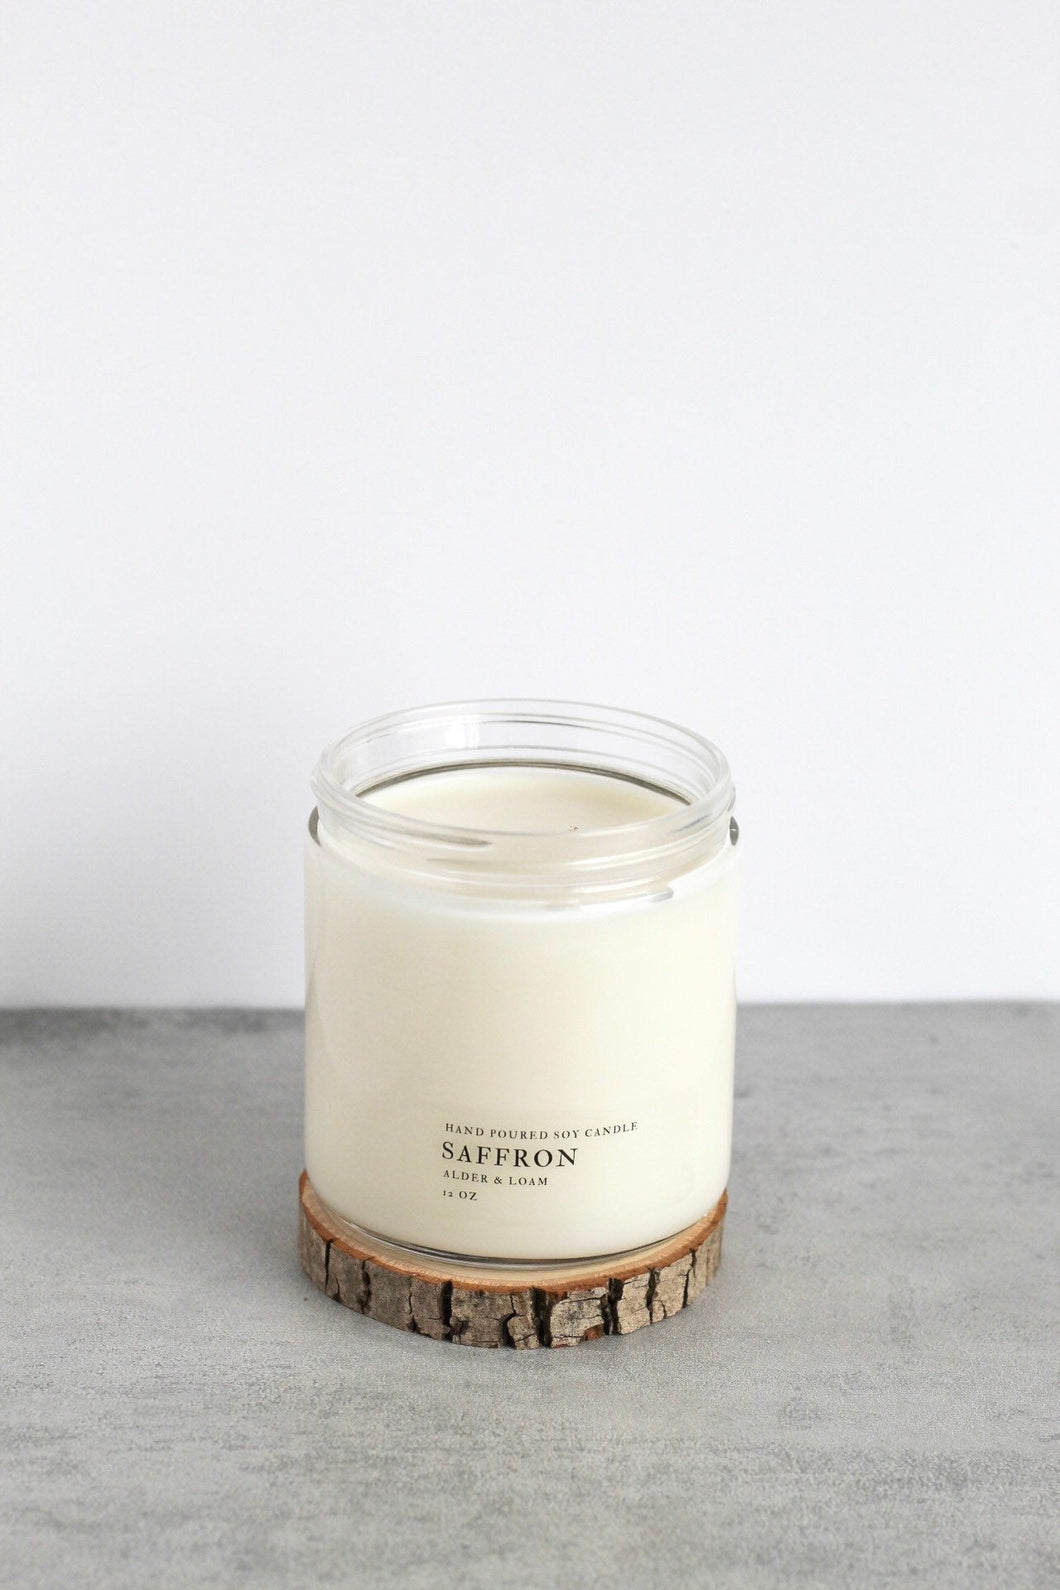 Saffron Double Wick Soy Candle, Hand Poured, Natural, Eco Friendly, Earthy Scent, 12 oz Jar